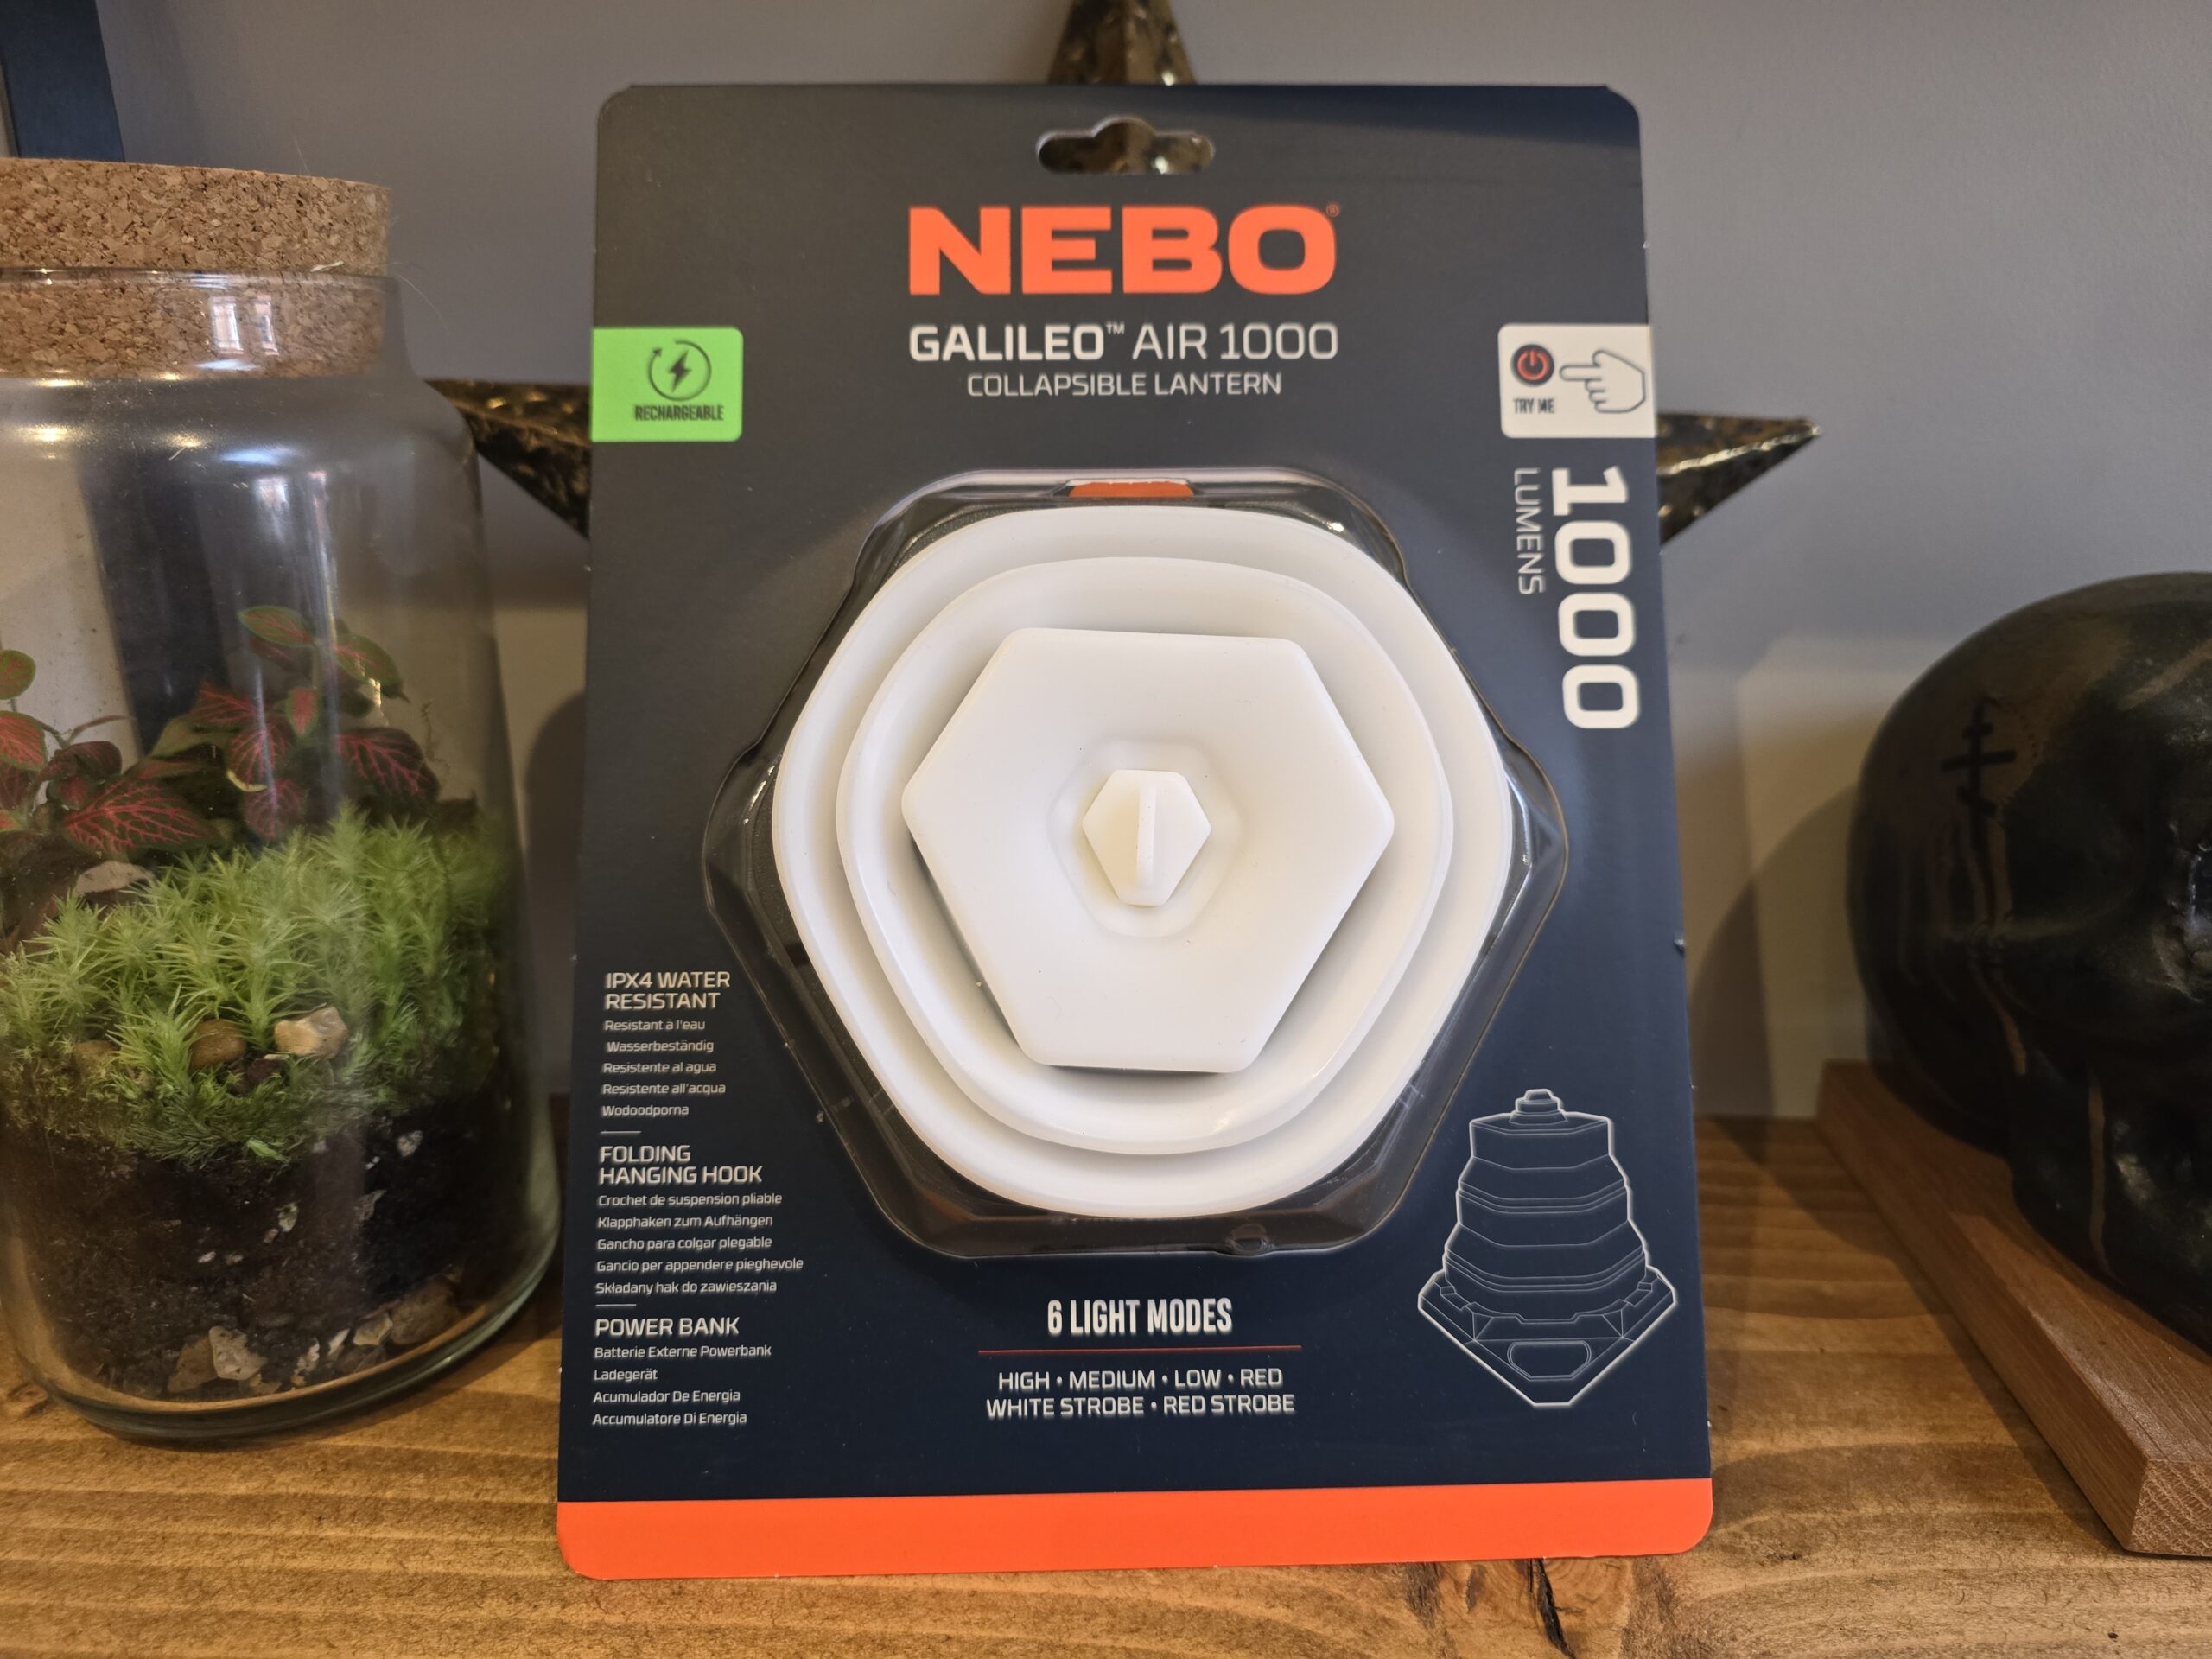 Nebo Galileo Air 1000 Collapsible Lantern Review scaled